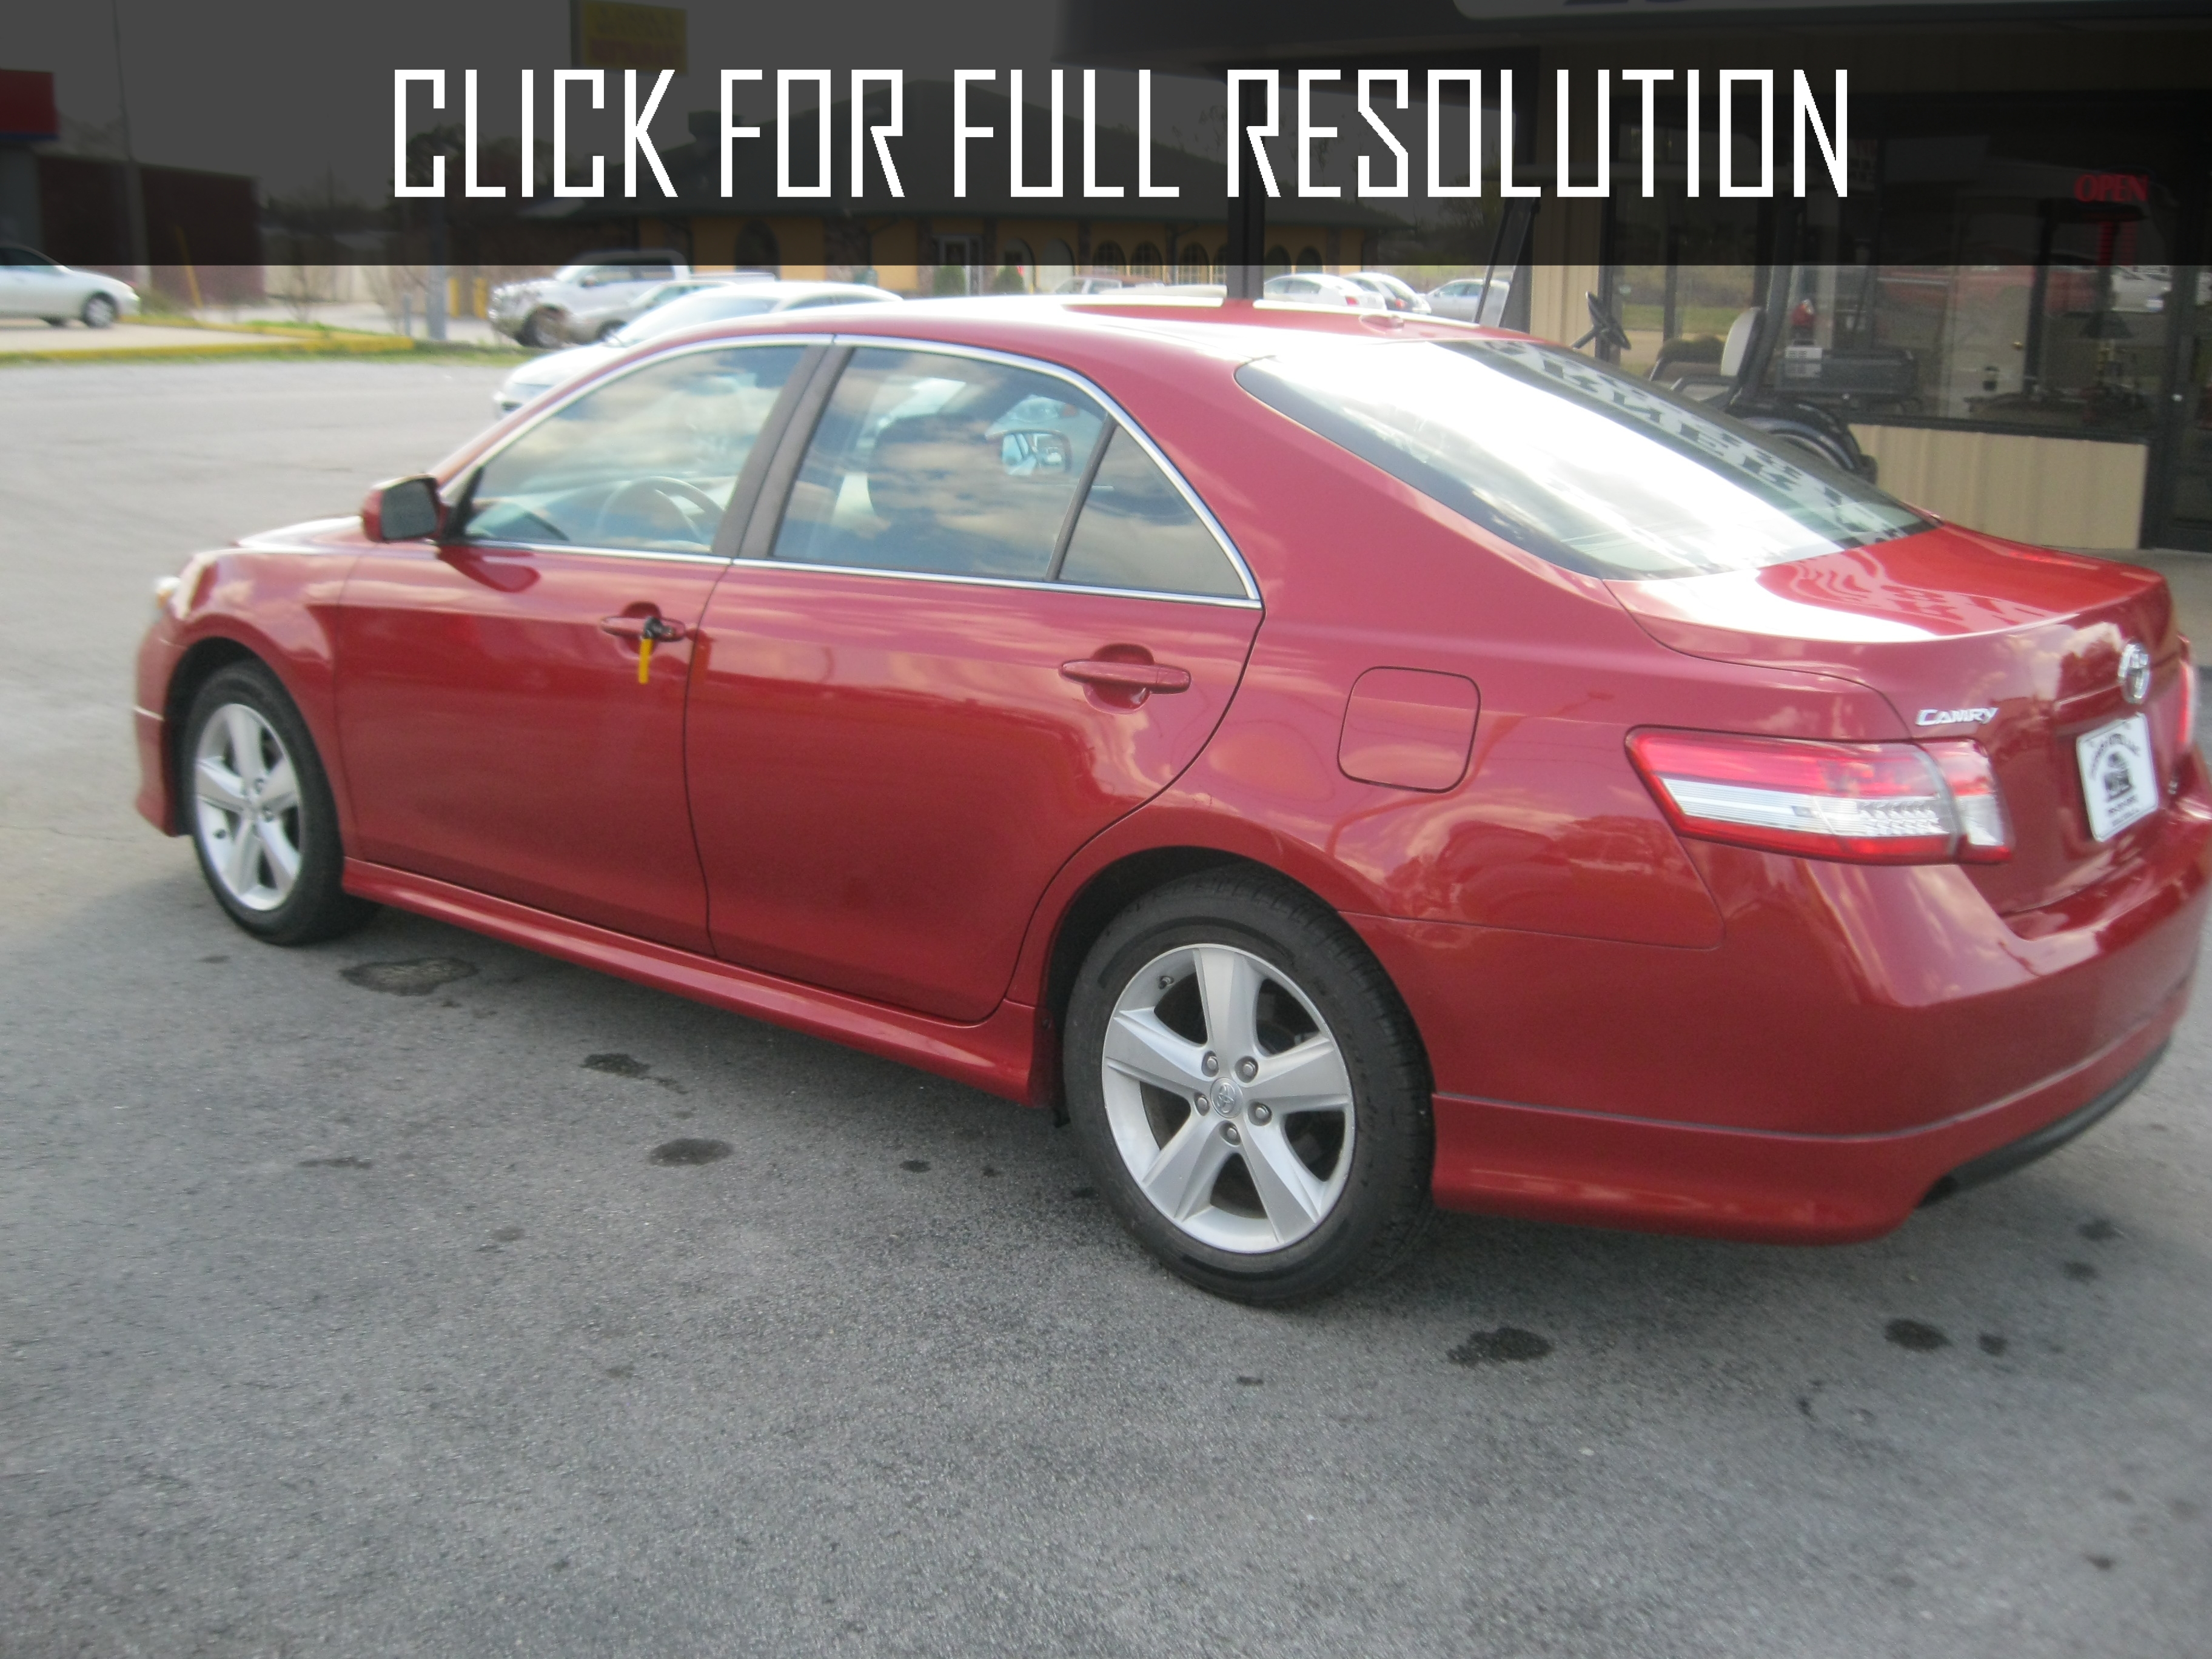 Toyota Camry Red